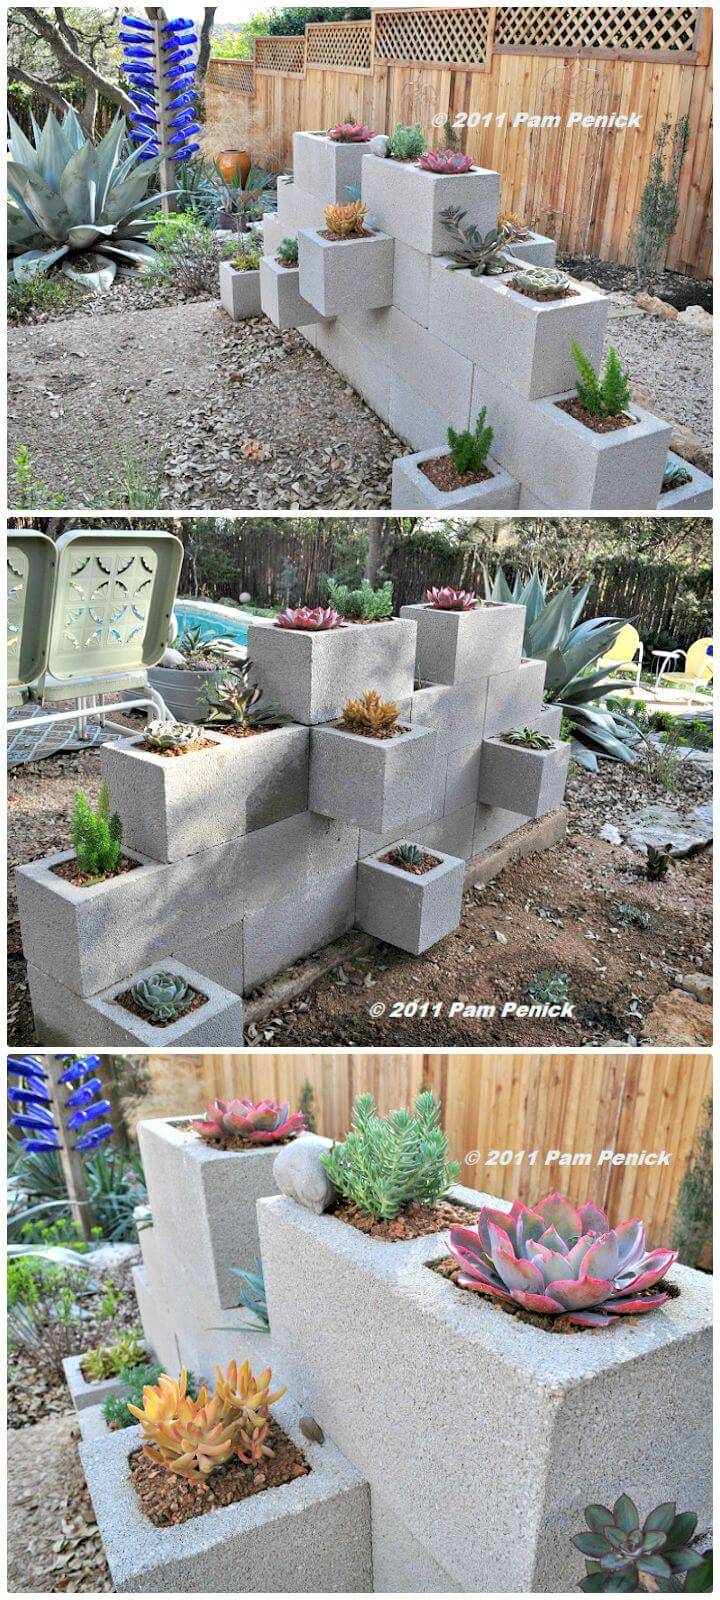 How To Make A Cinder Block Wall Planter - Free Tutorial